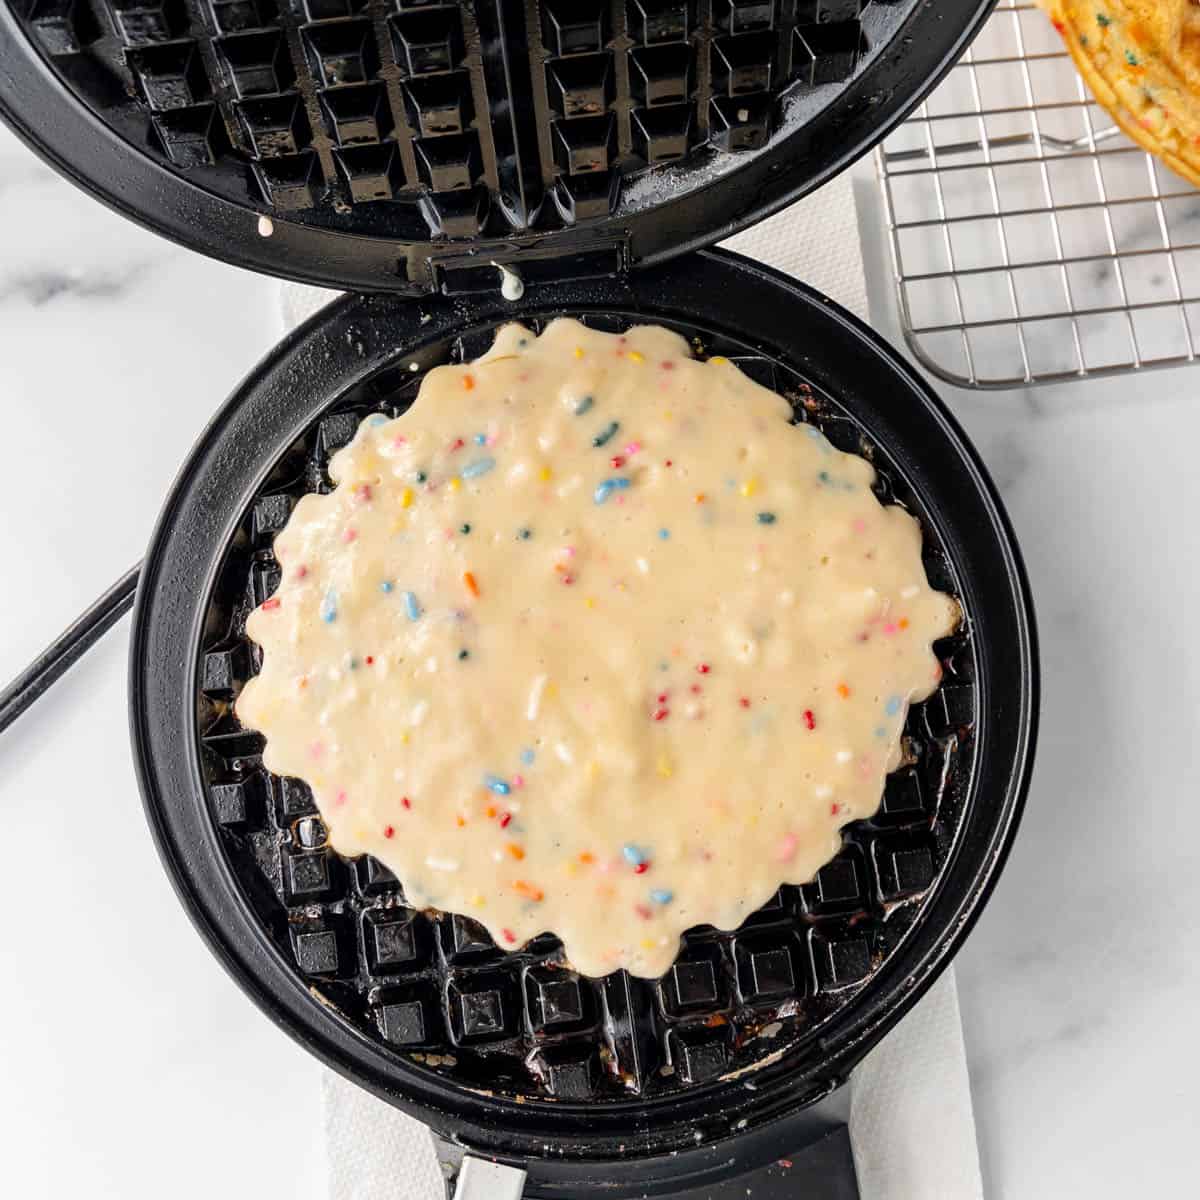 Waffle batter in a waffle iron